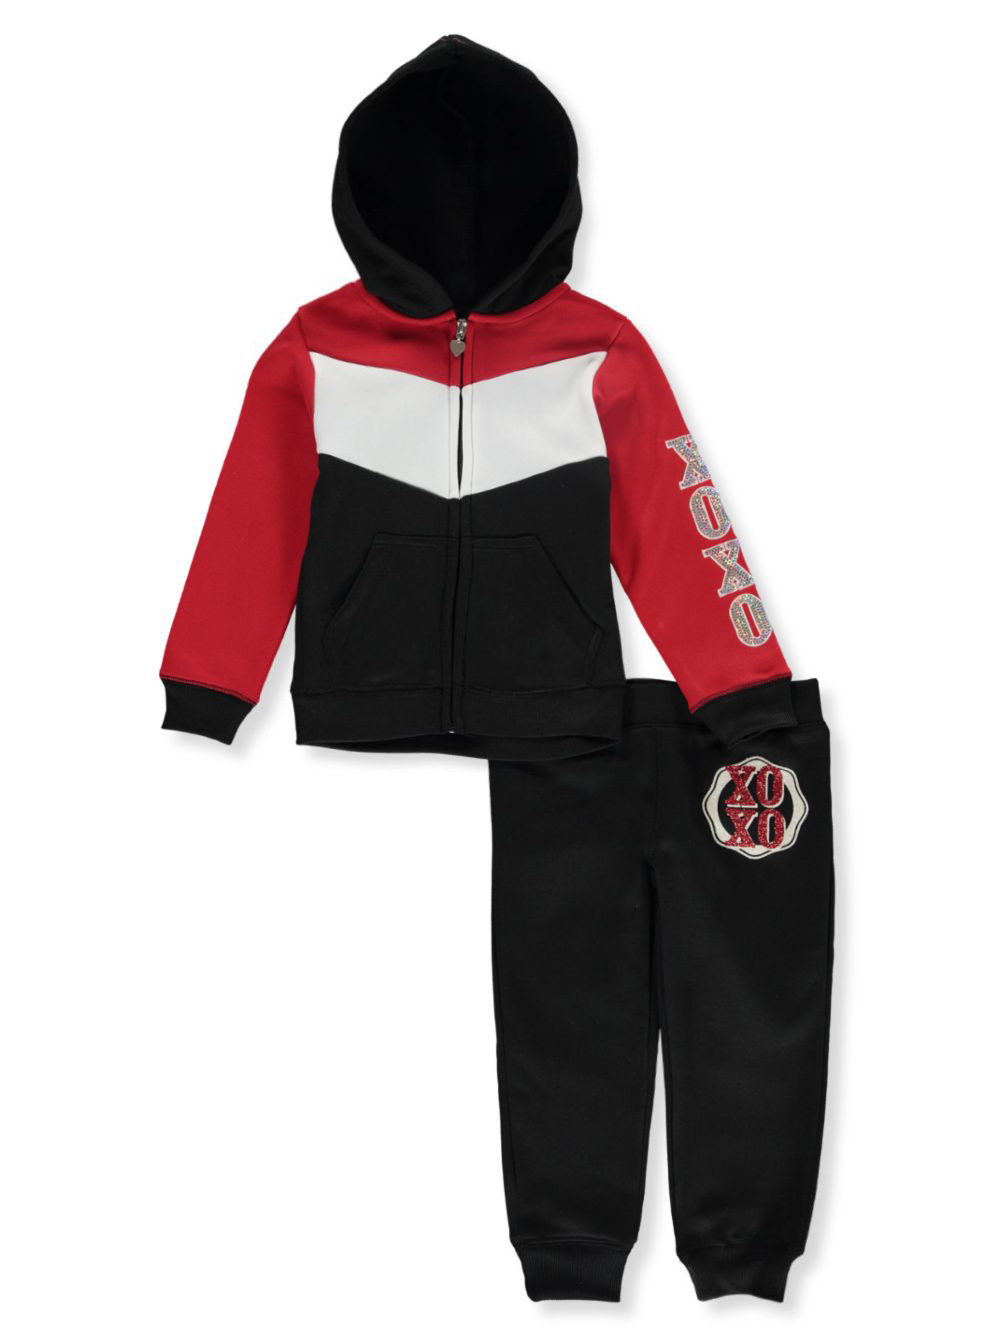 Paneled 2-Piece Sweatsuit Outfit